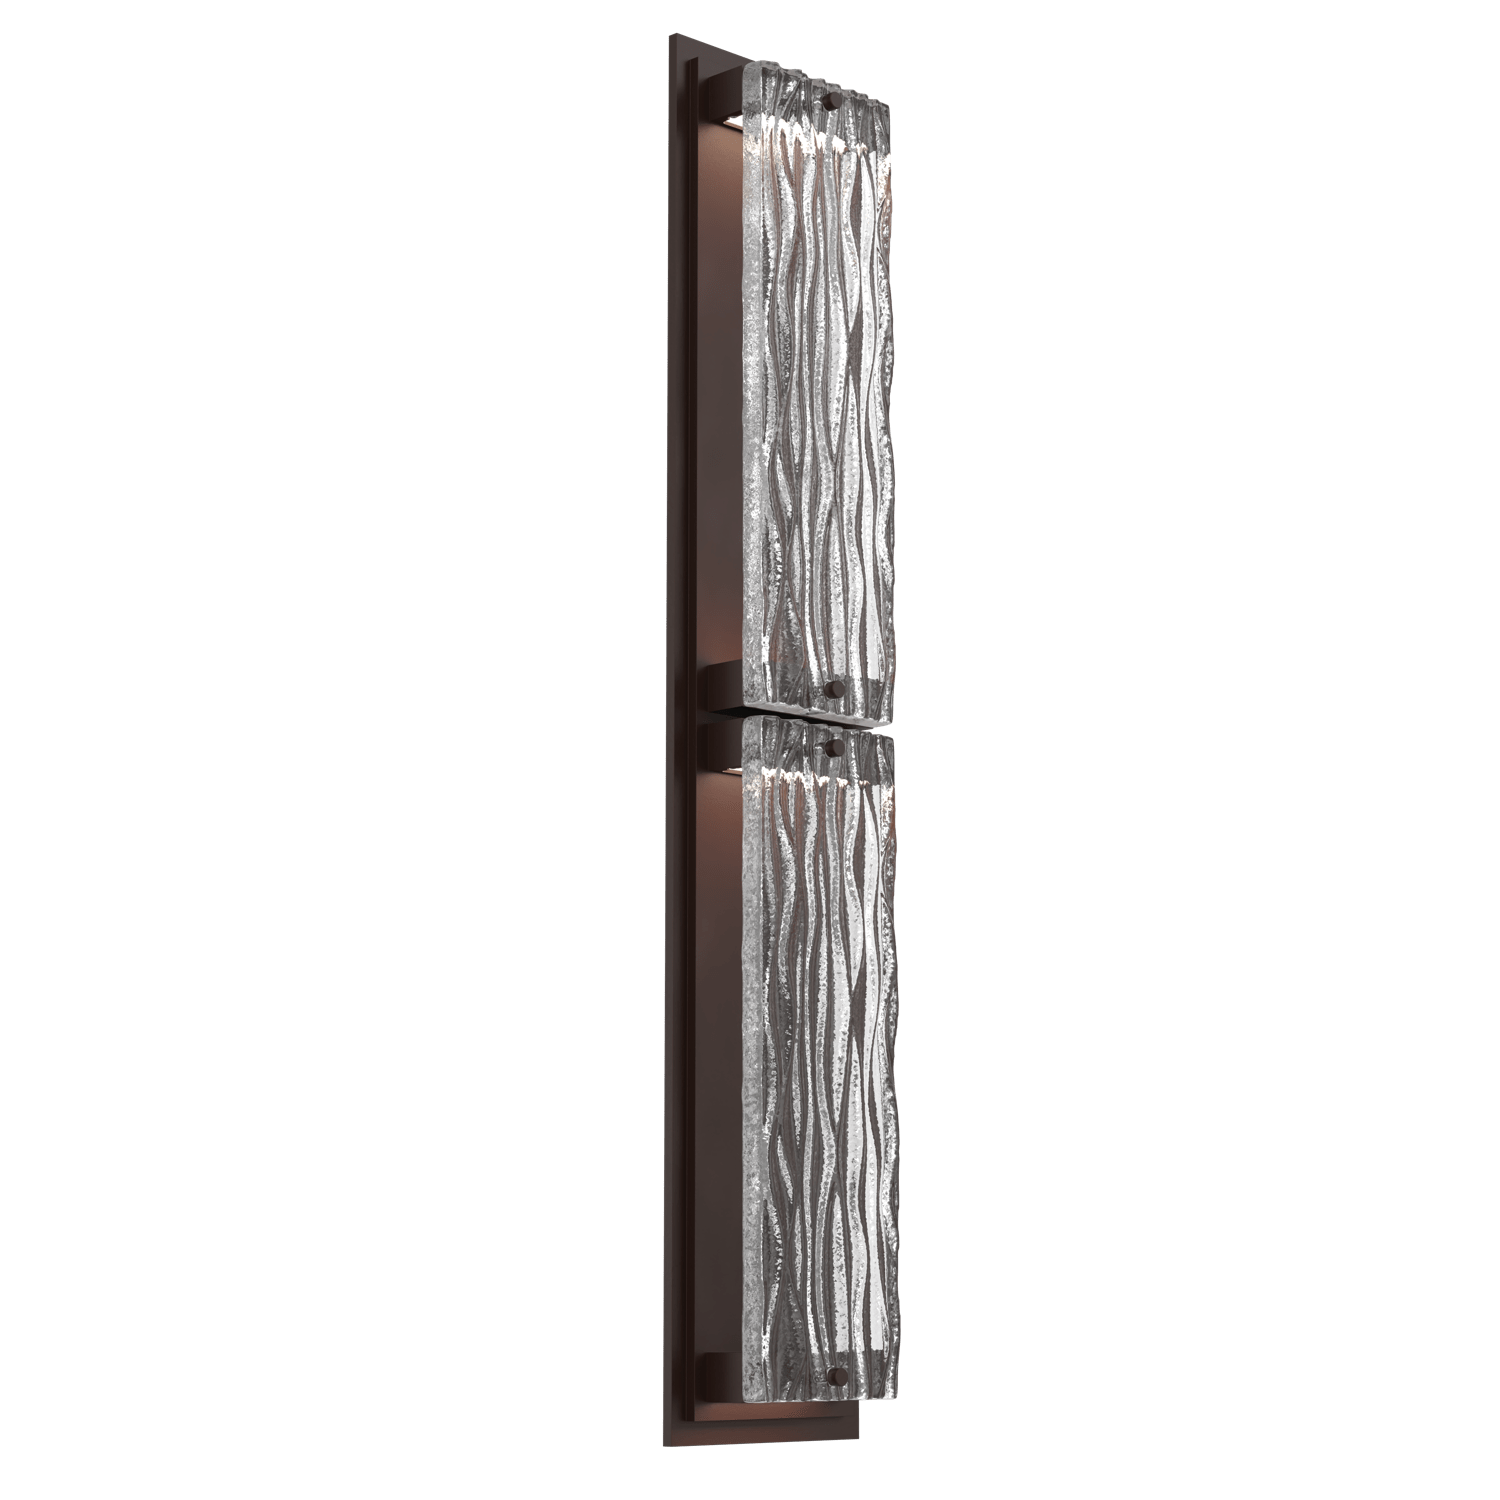 ODB0090-02-SB-TT-Hammerton-Studio-Tabulo-28-inch-outdoor-sconce-with-statuary-bronze-finish-and-clear-tidal-cast-glass-shade-and-LED-lamping